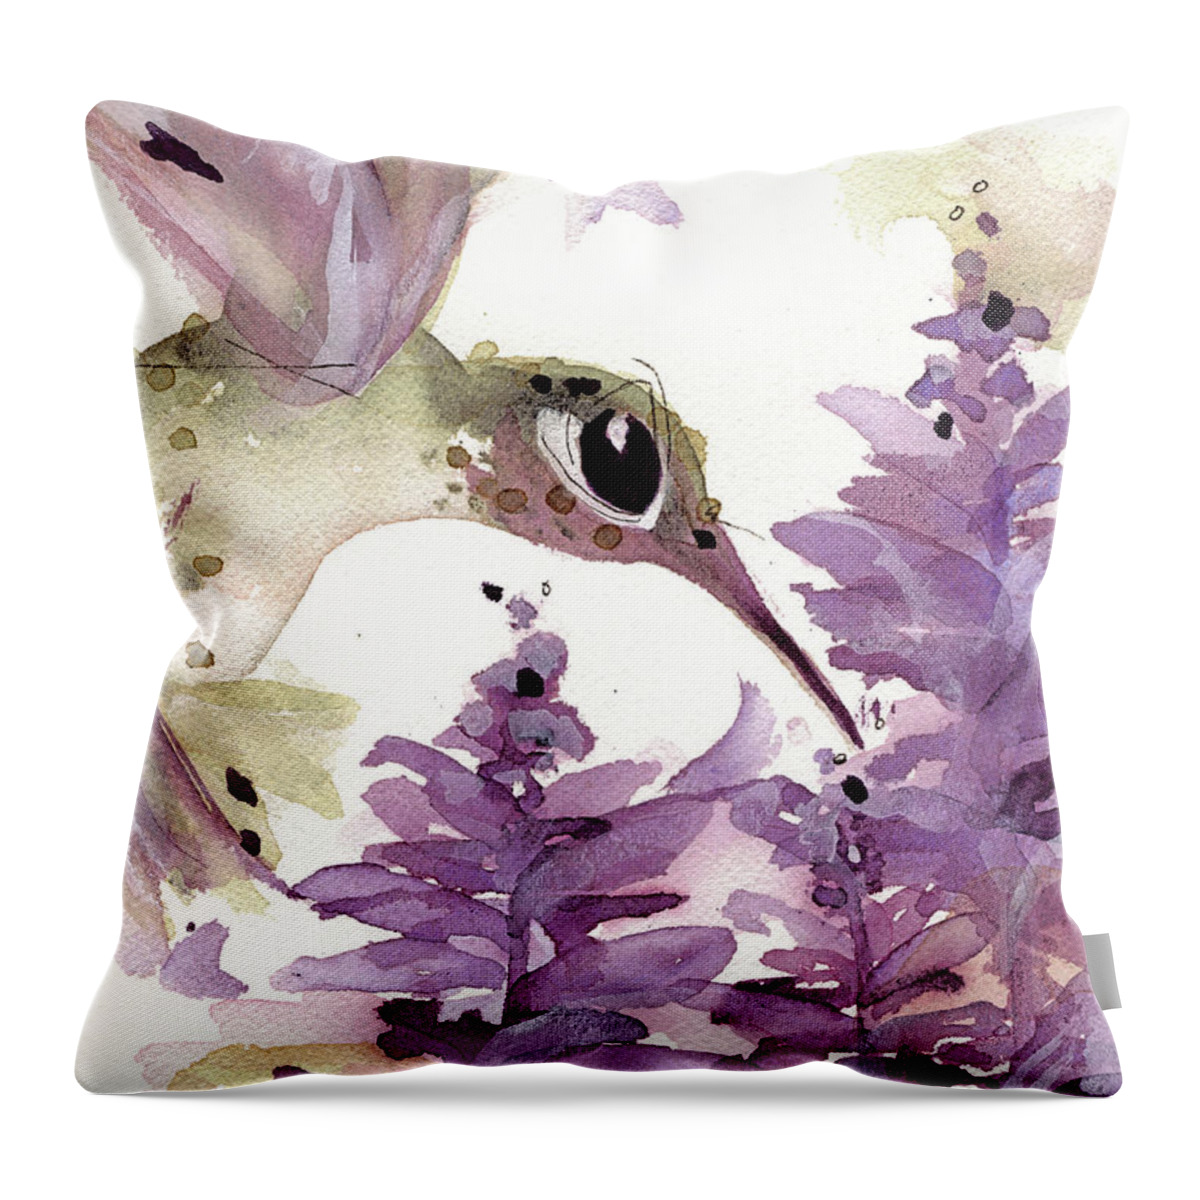 Hummingbird Throw Pillow featuring the painting Lavender Hummer by Dawn Derman